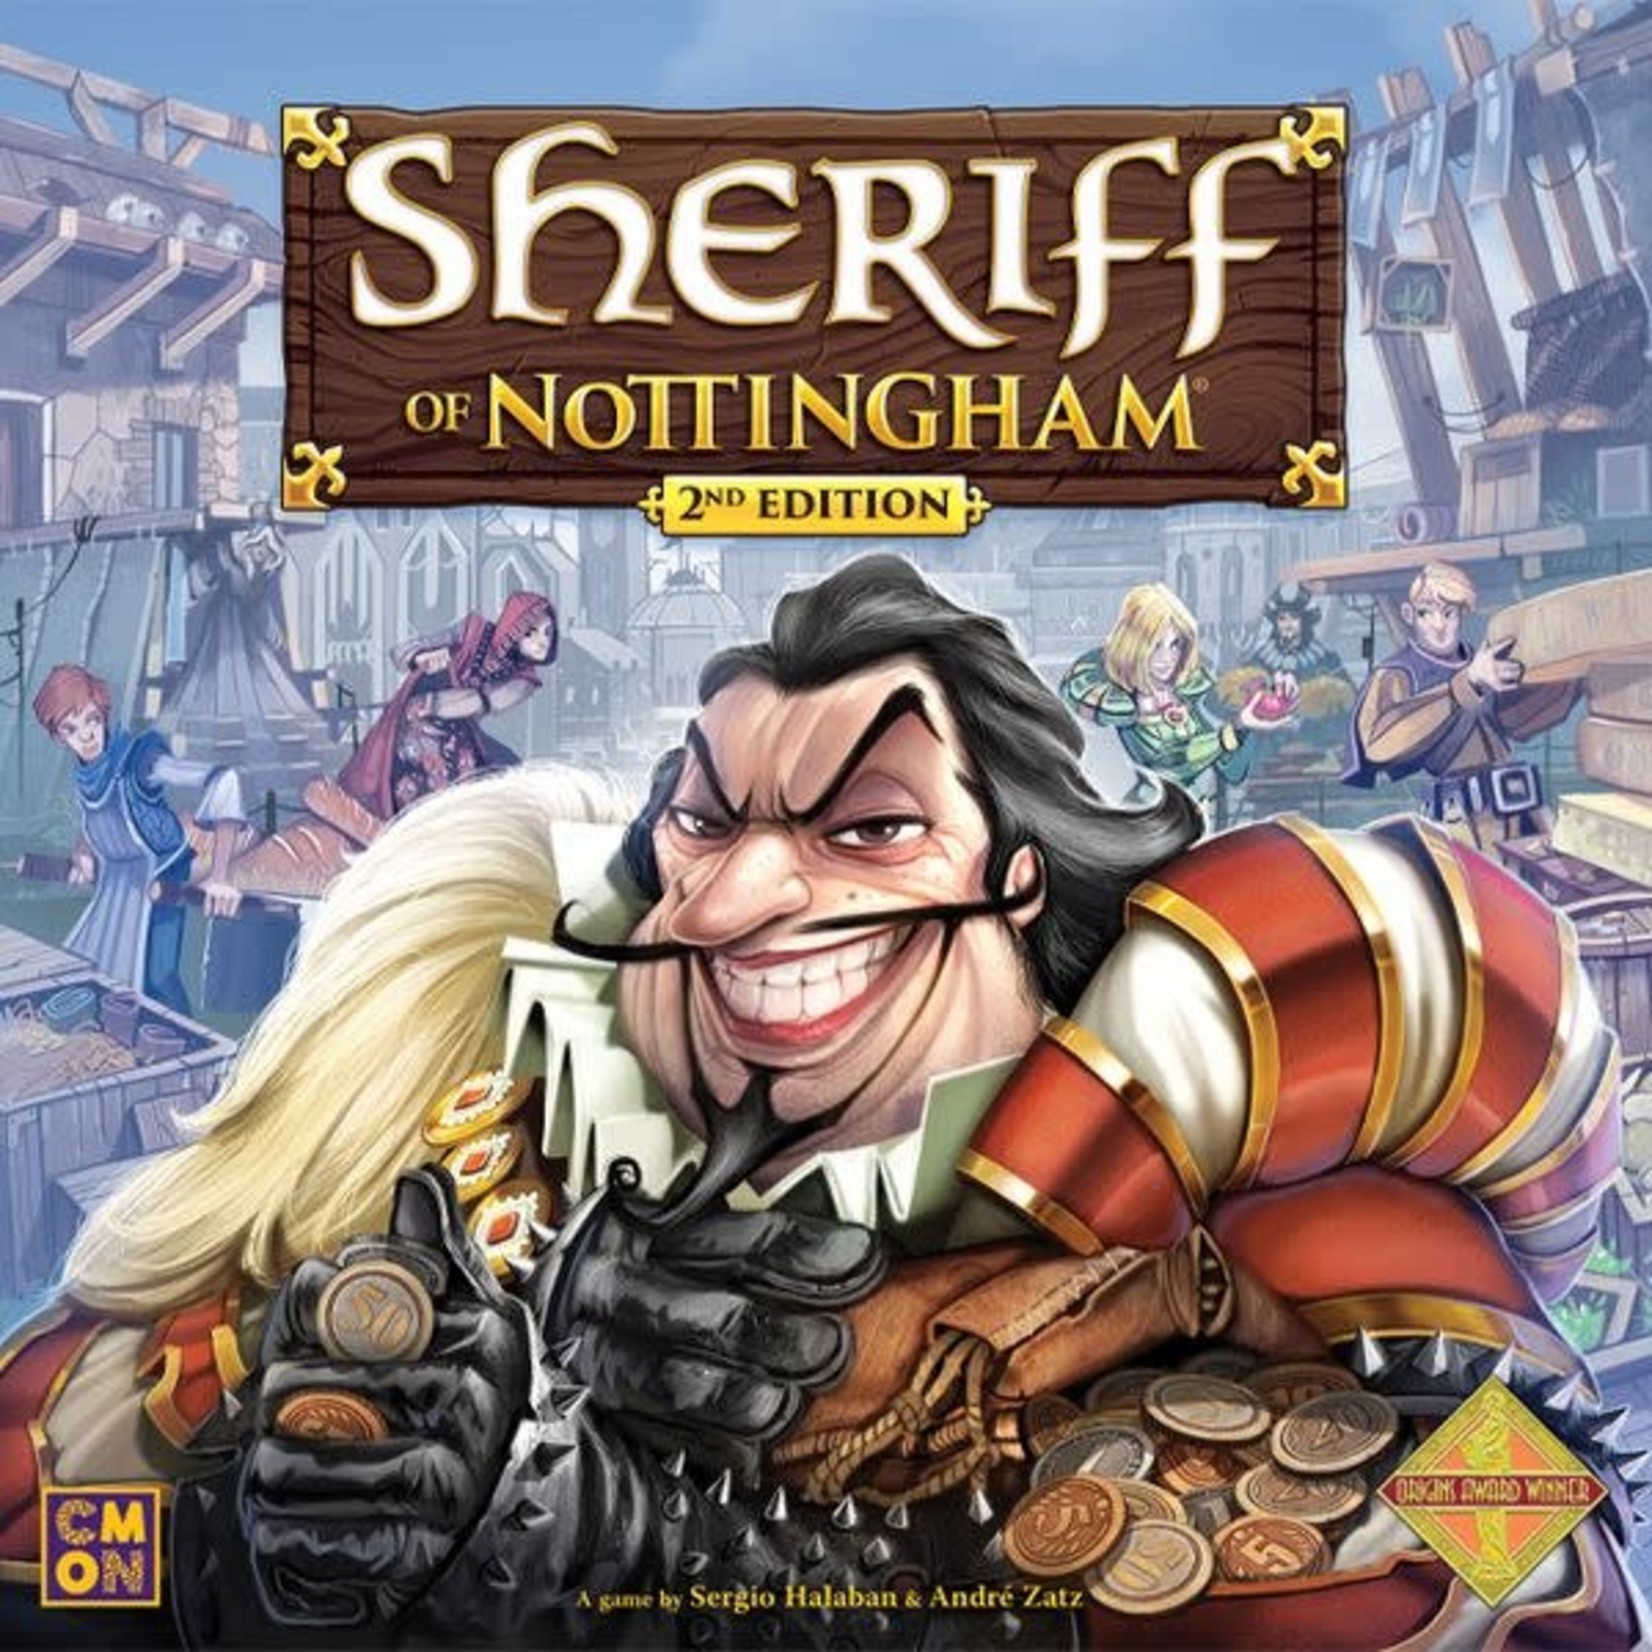 Cool Mini or Not Sheriff of Nottingham (2nd Edition) (ANA Top 40)